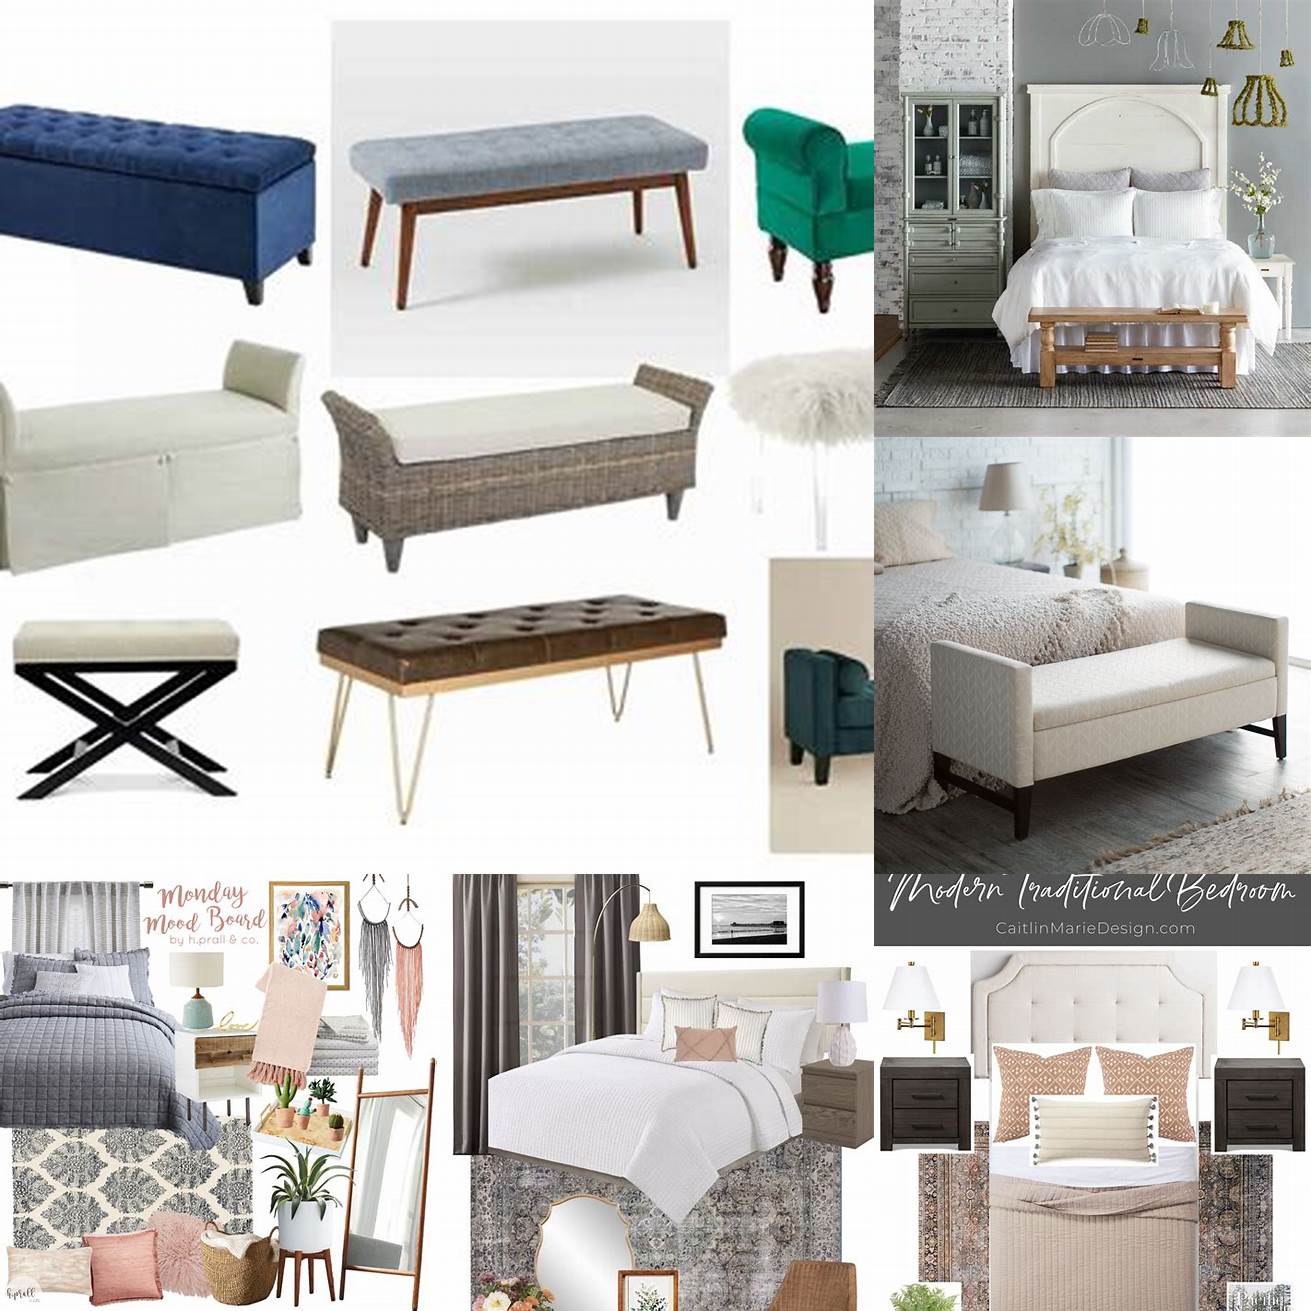 Style Think about the overall style and mood of your bedroom and choose a bench that reflects it